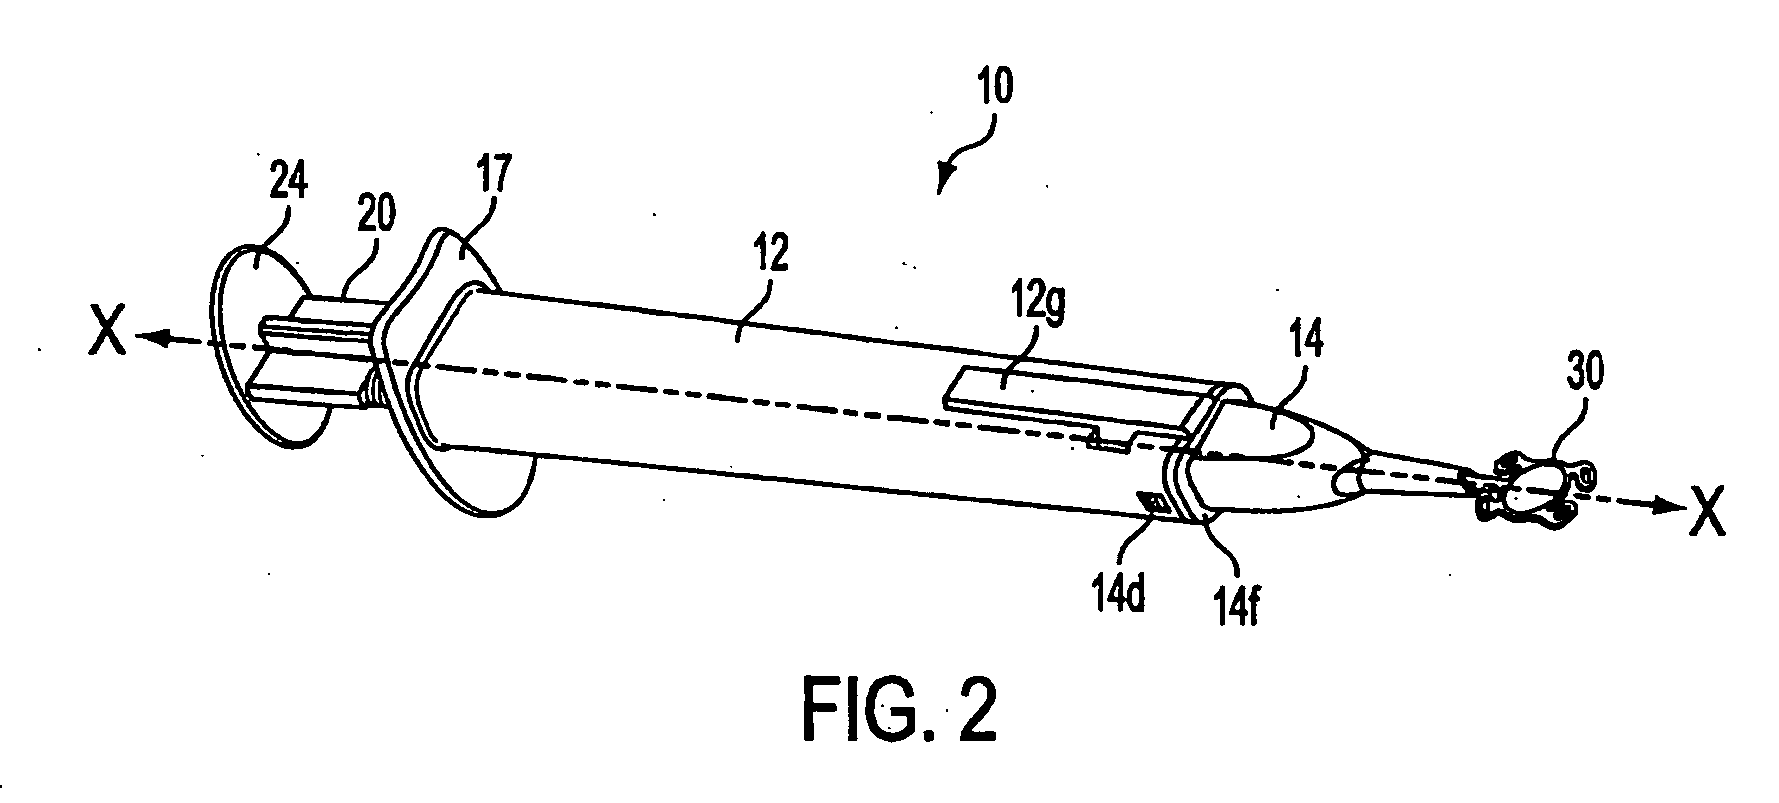 Preloaded injector for intraocular lenses and methods of making and using